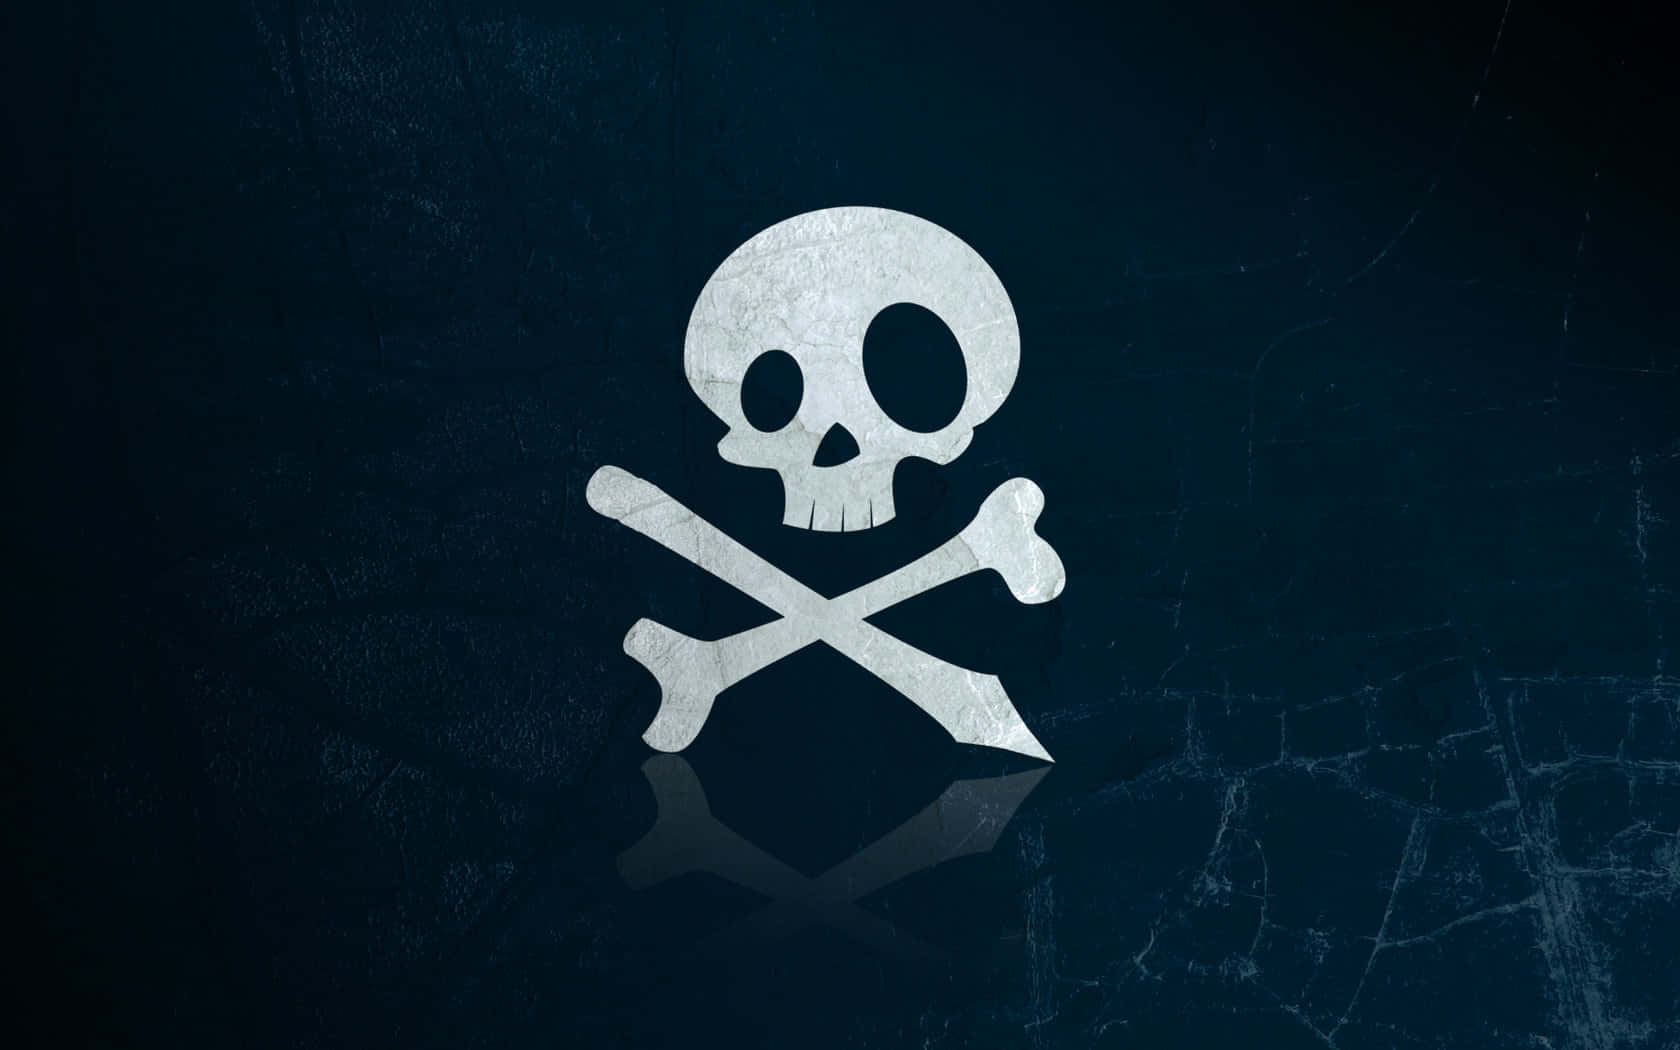 A White Skull And Crossbones Logo On A Dark Background Background